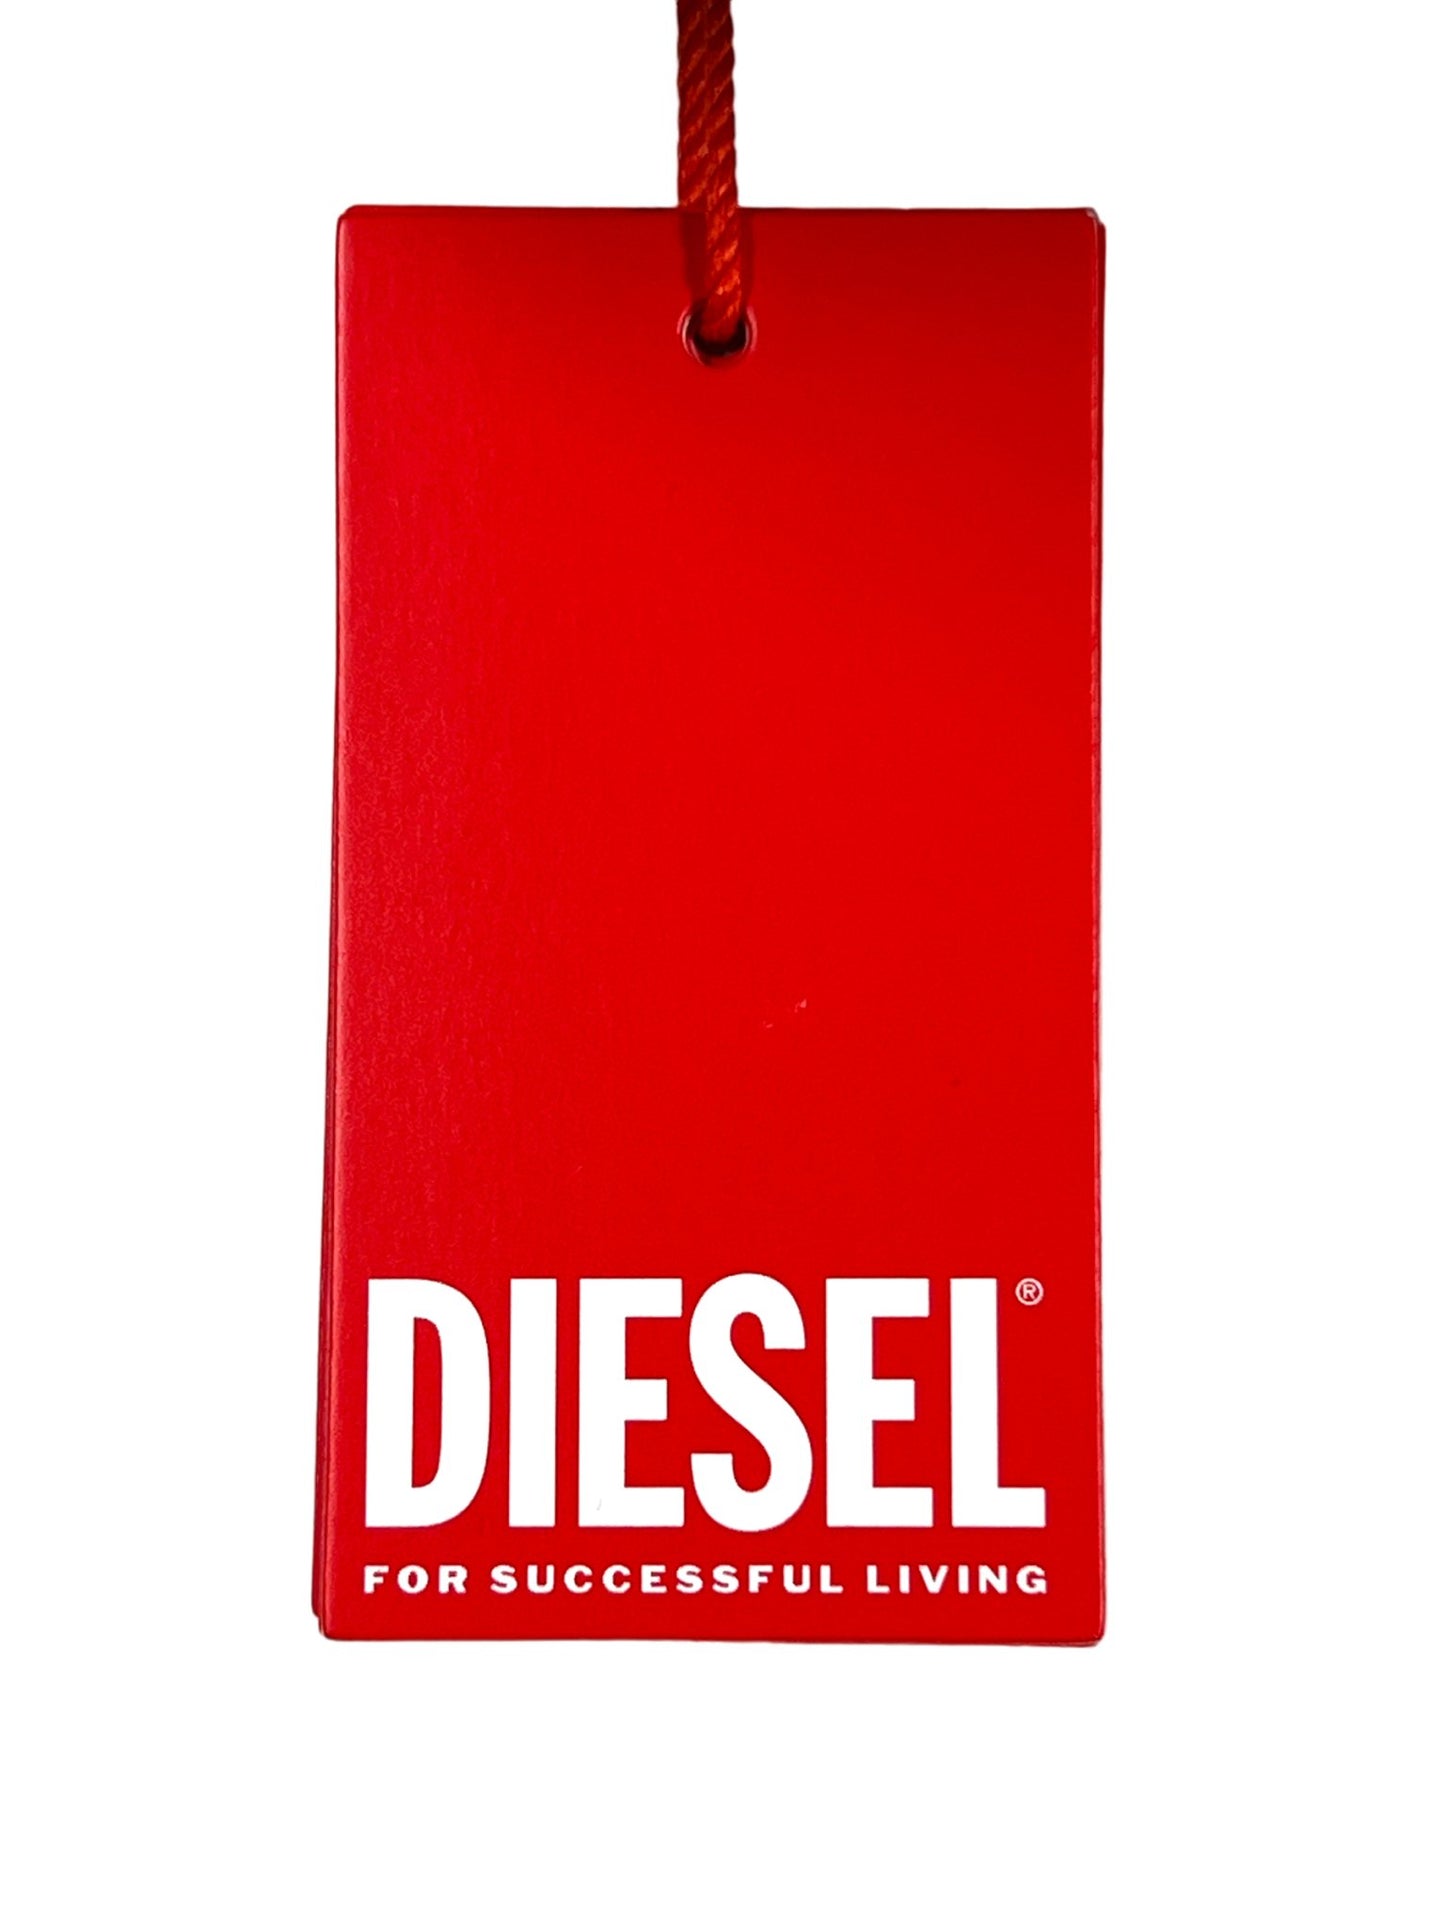 Red DIESEL T-RUST graphic t-shirt brand tag with the slogan "for successful living